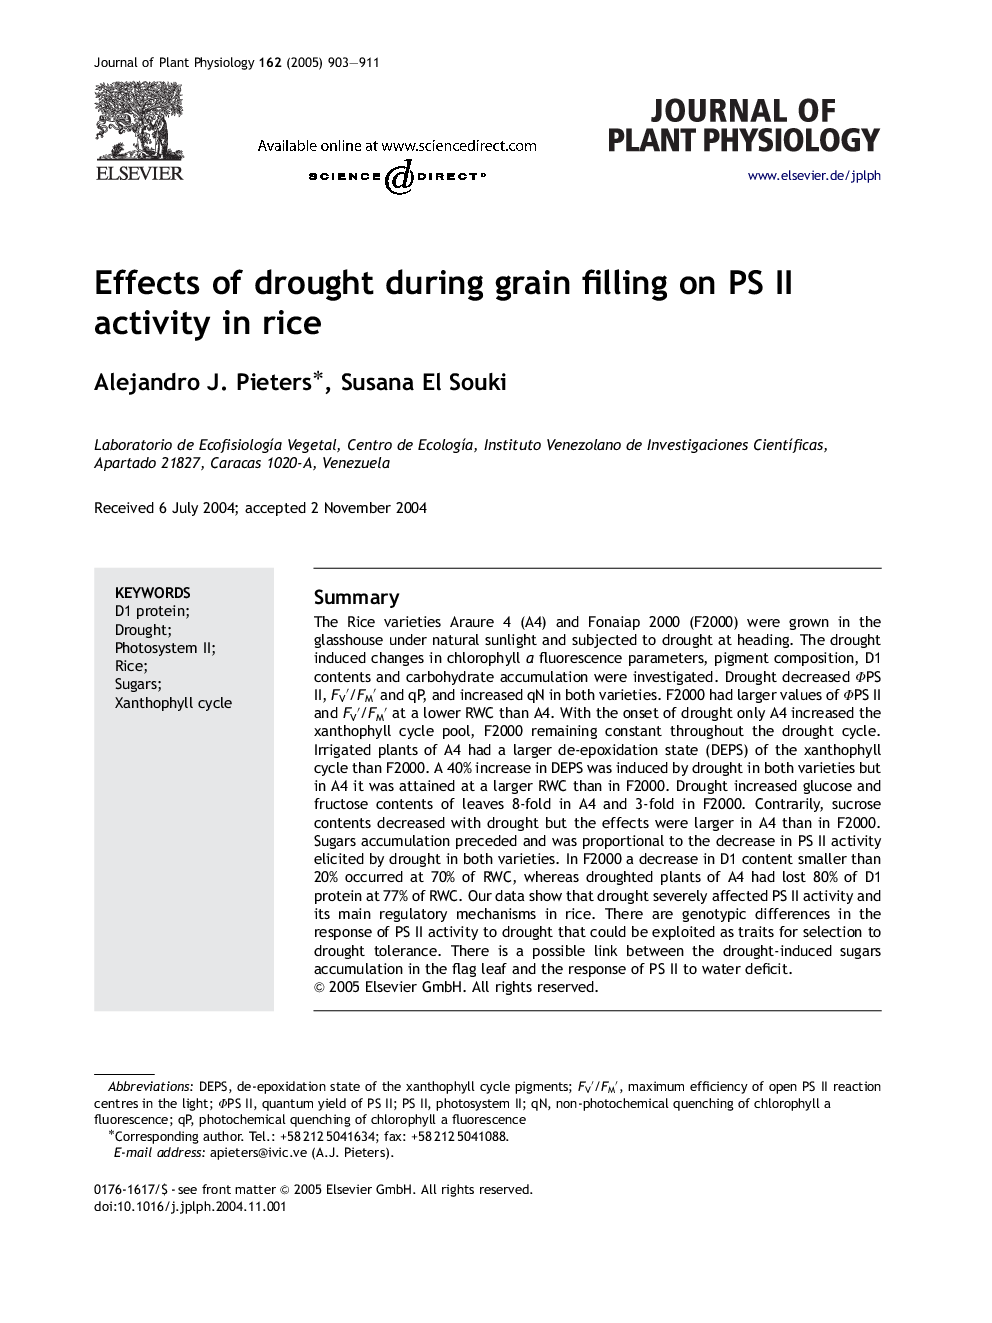 Effects of drought during grain filling on PS II activity in rice